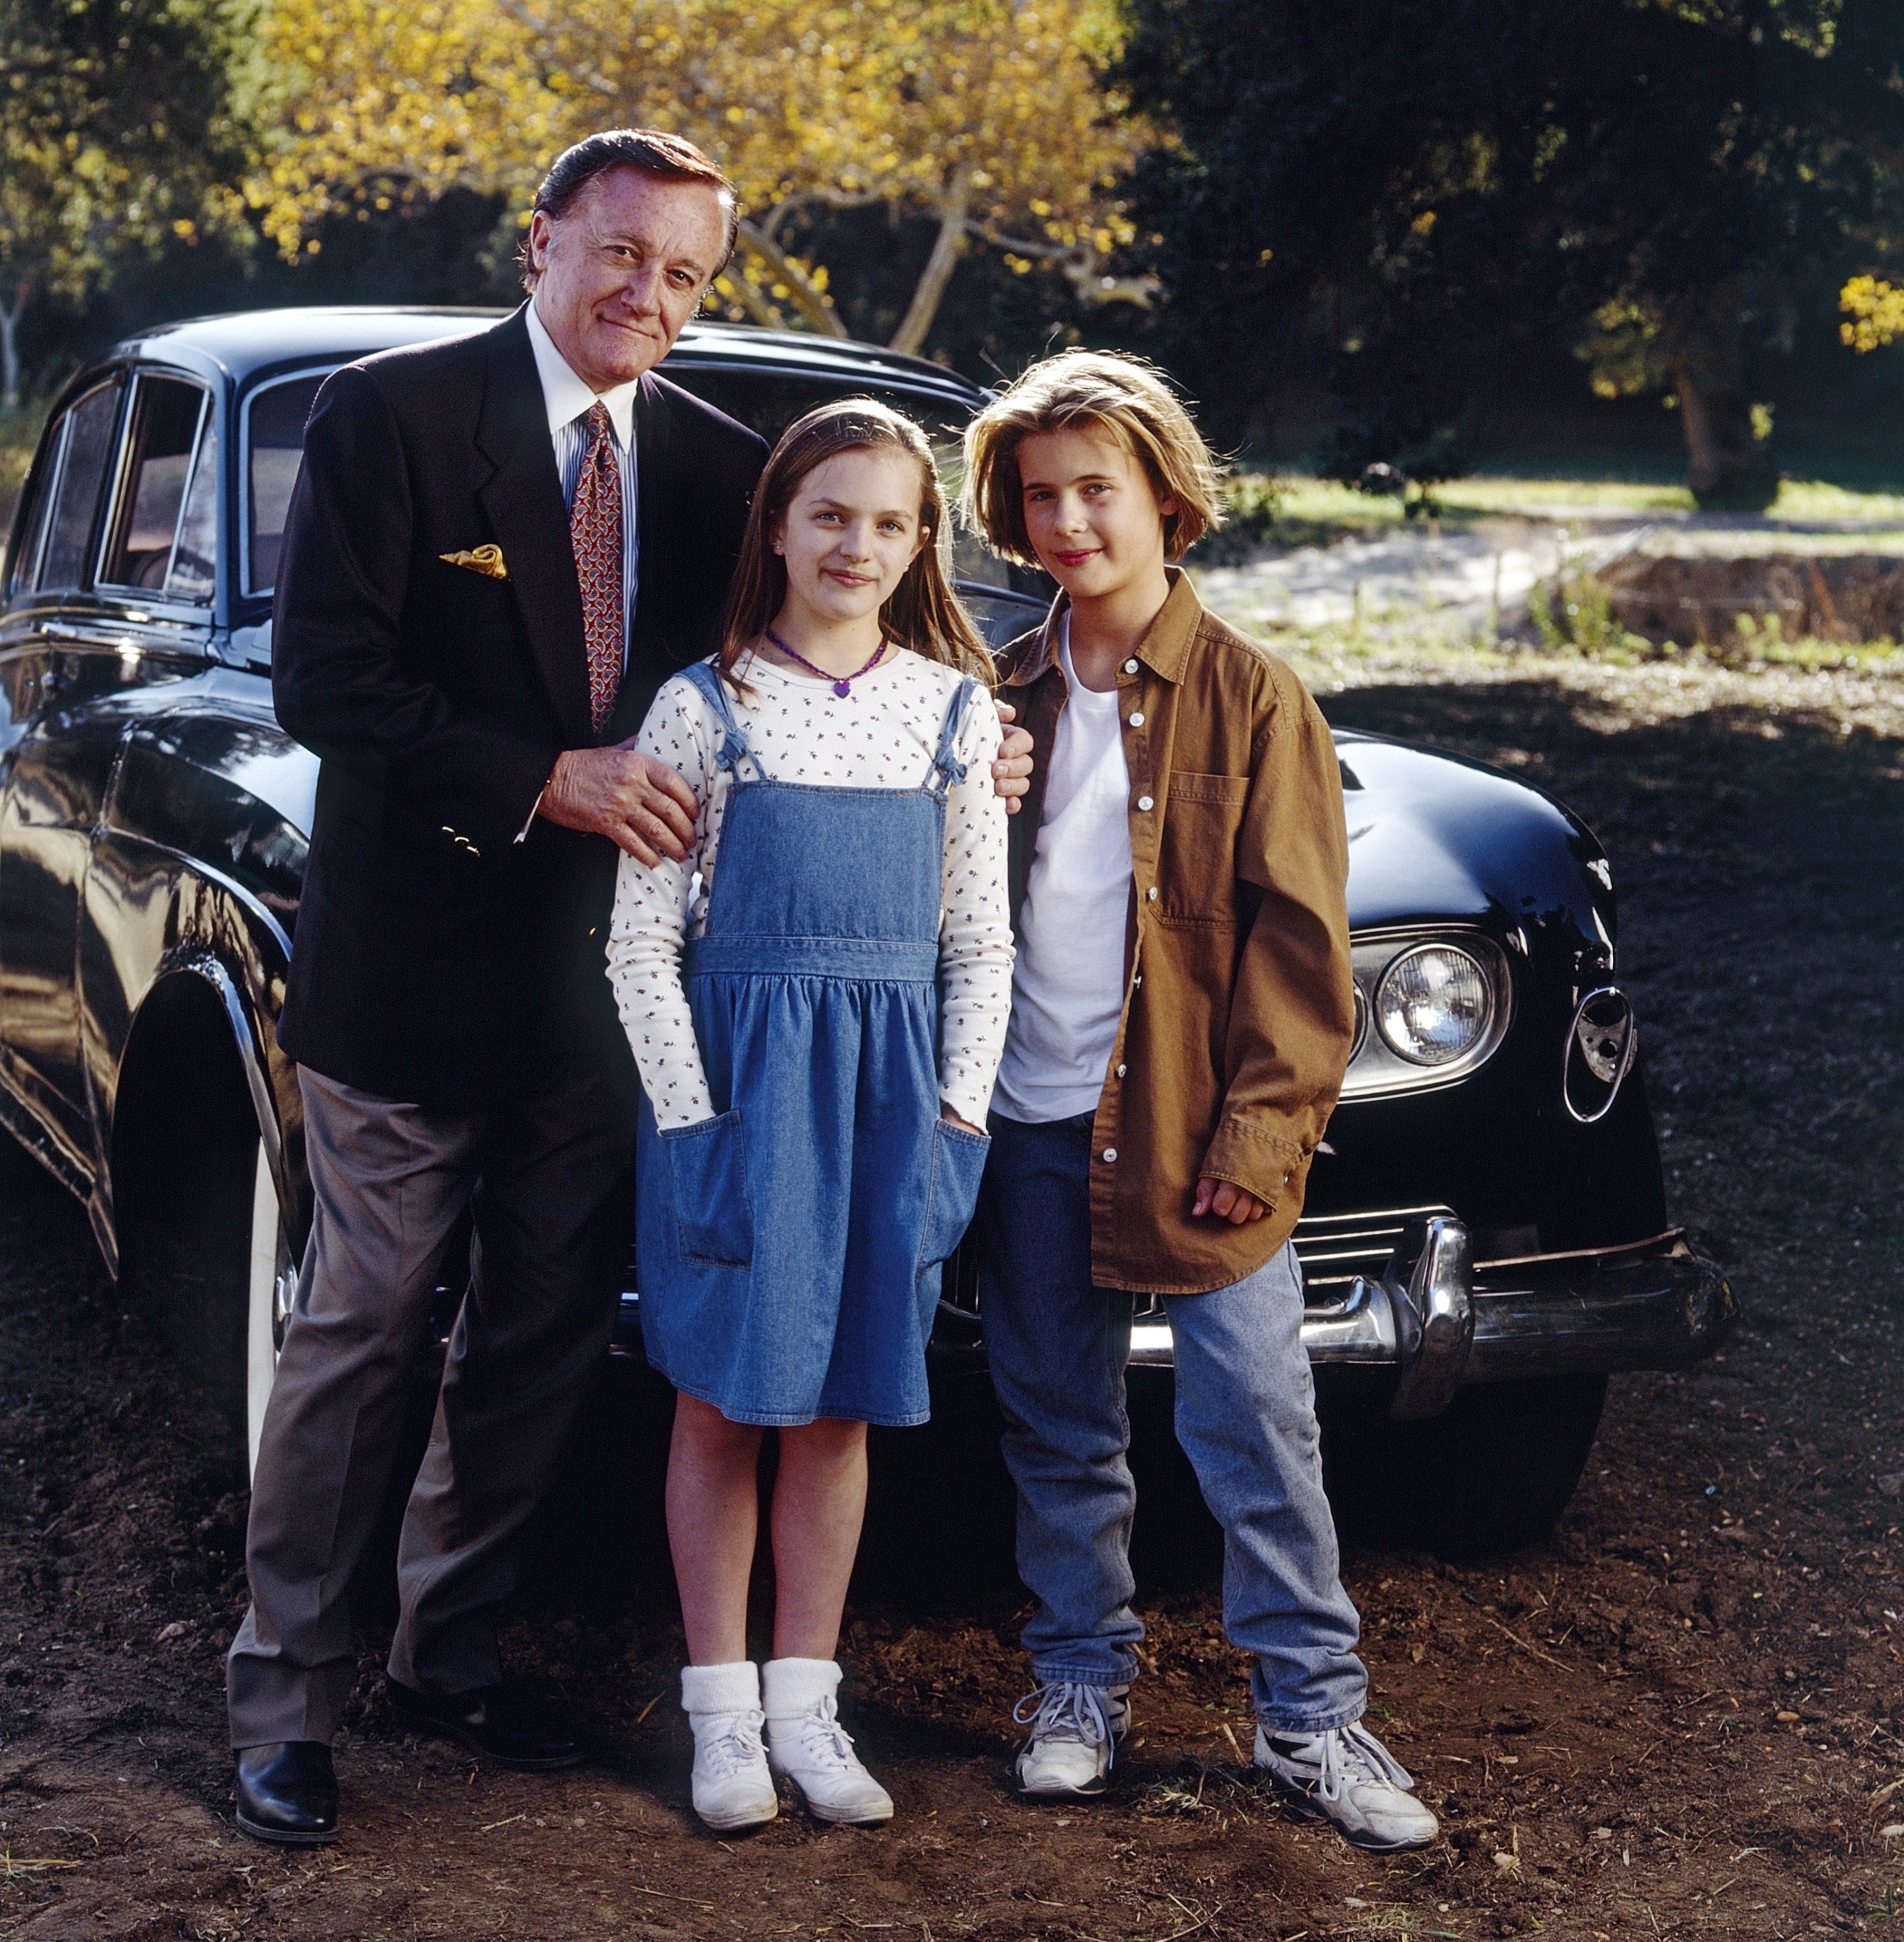 man and two pre-teens standing in front of a car